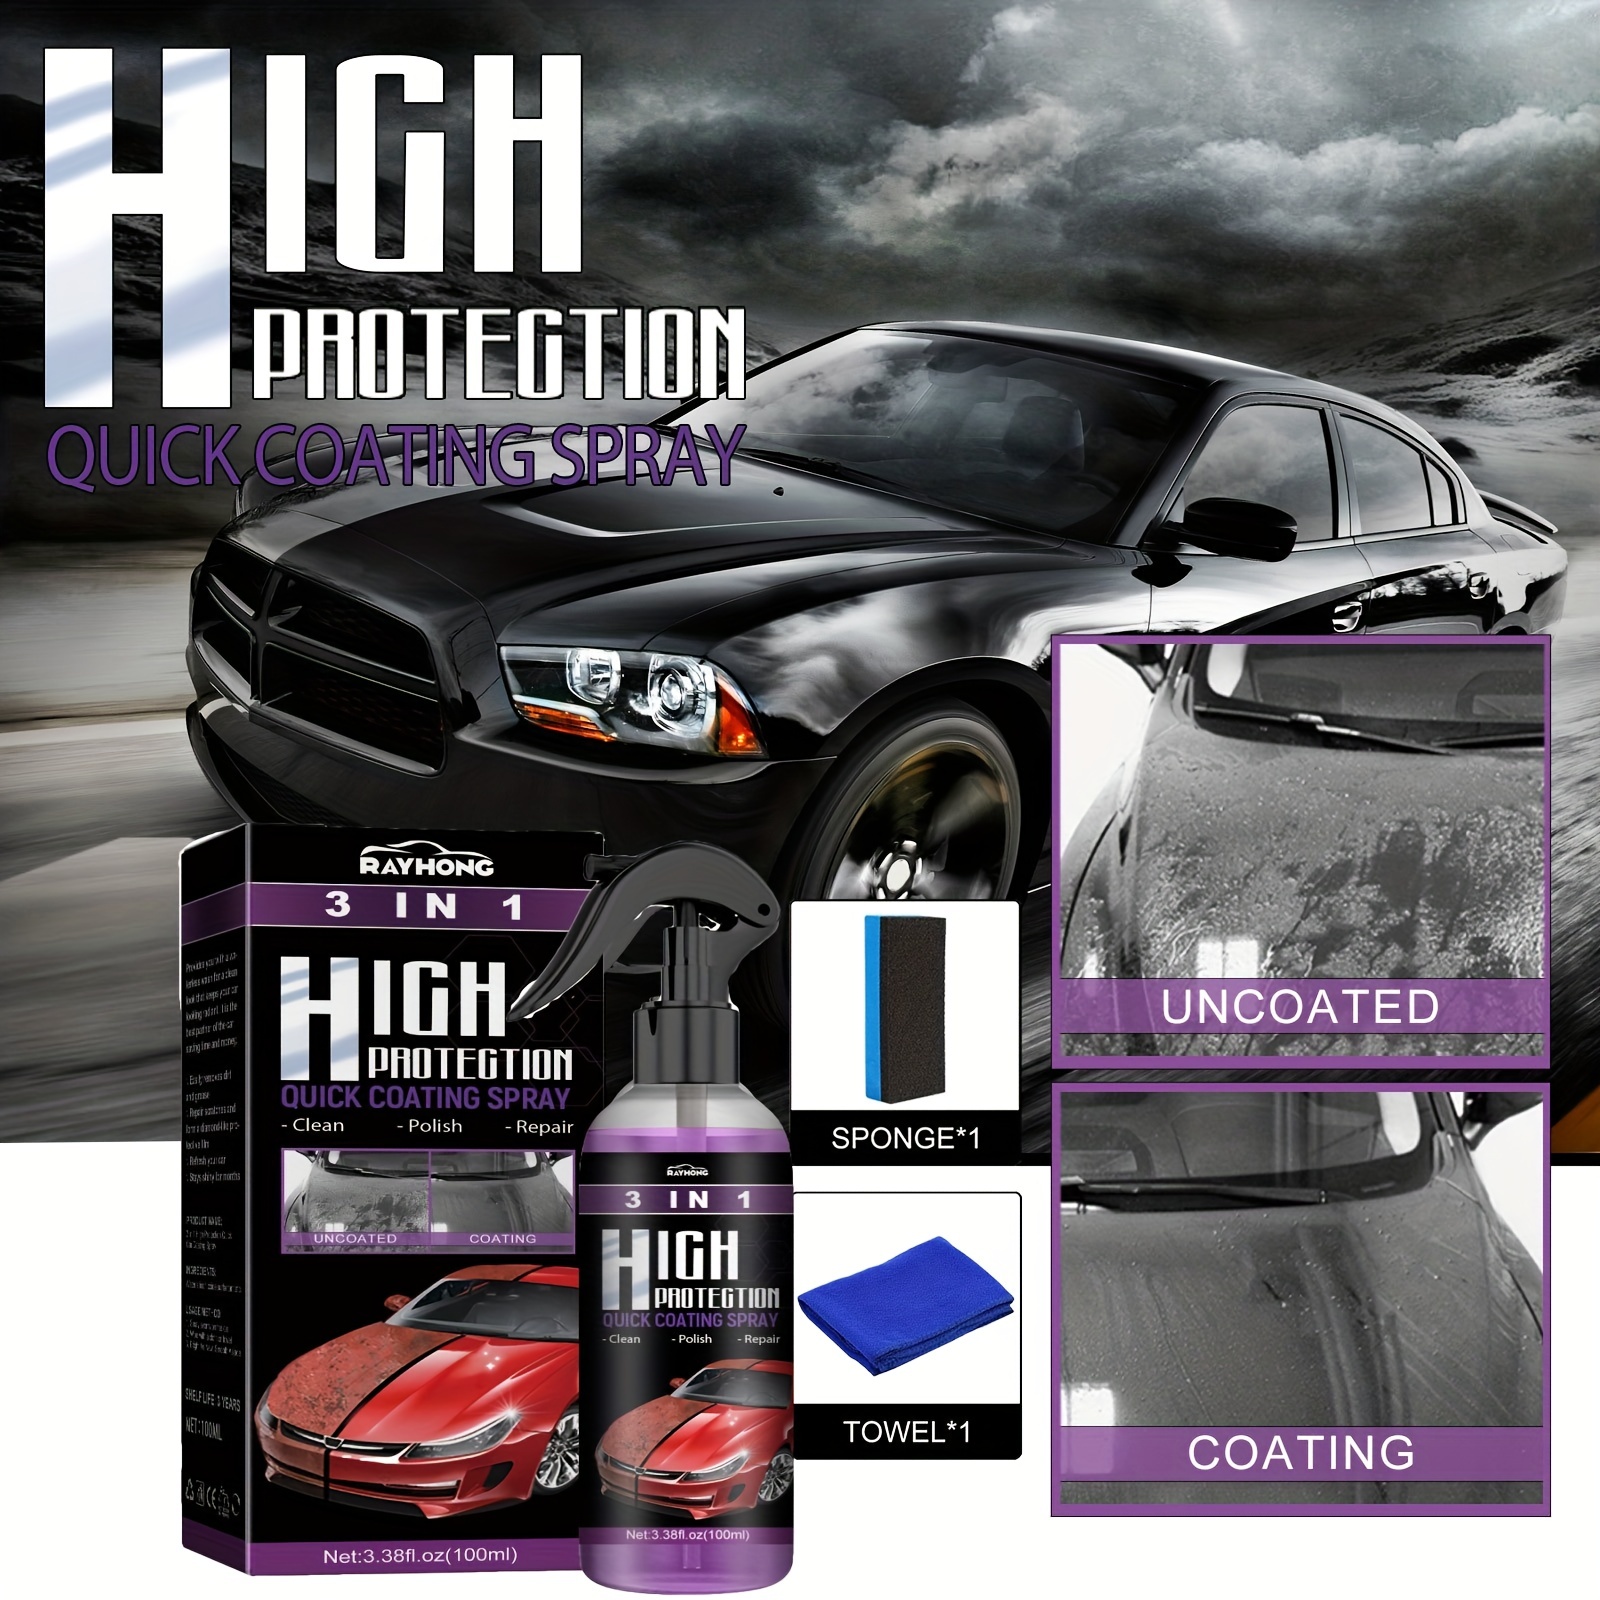  3 in 1 High Protection Quick Car Coating Spray, High